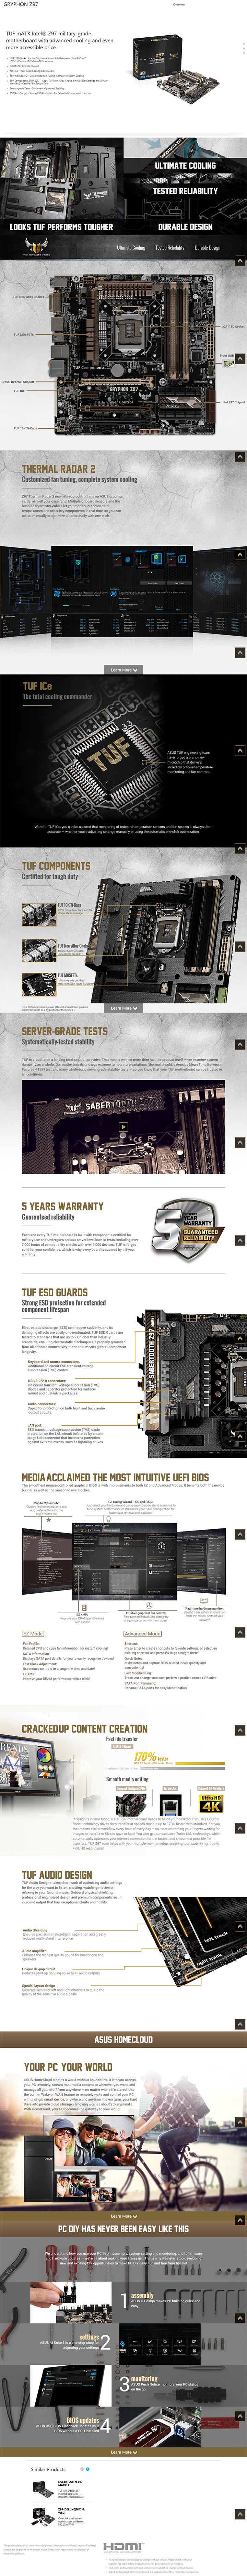 s1 ASUS TUF GRYPHON Z97 mATX Motherboard Review